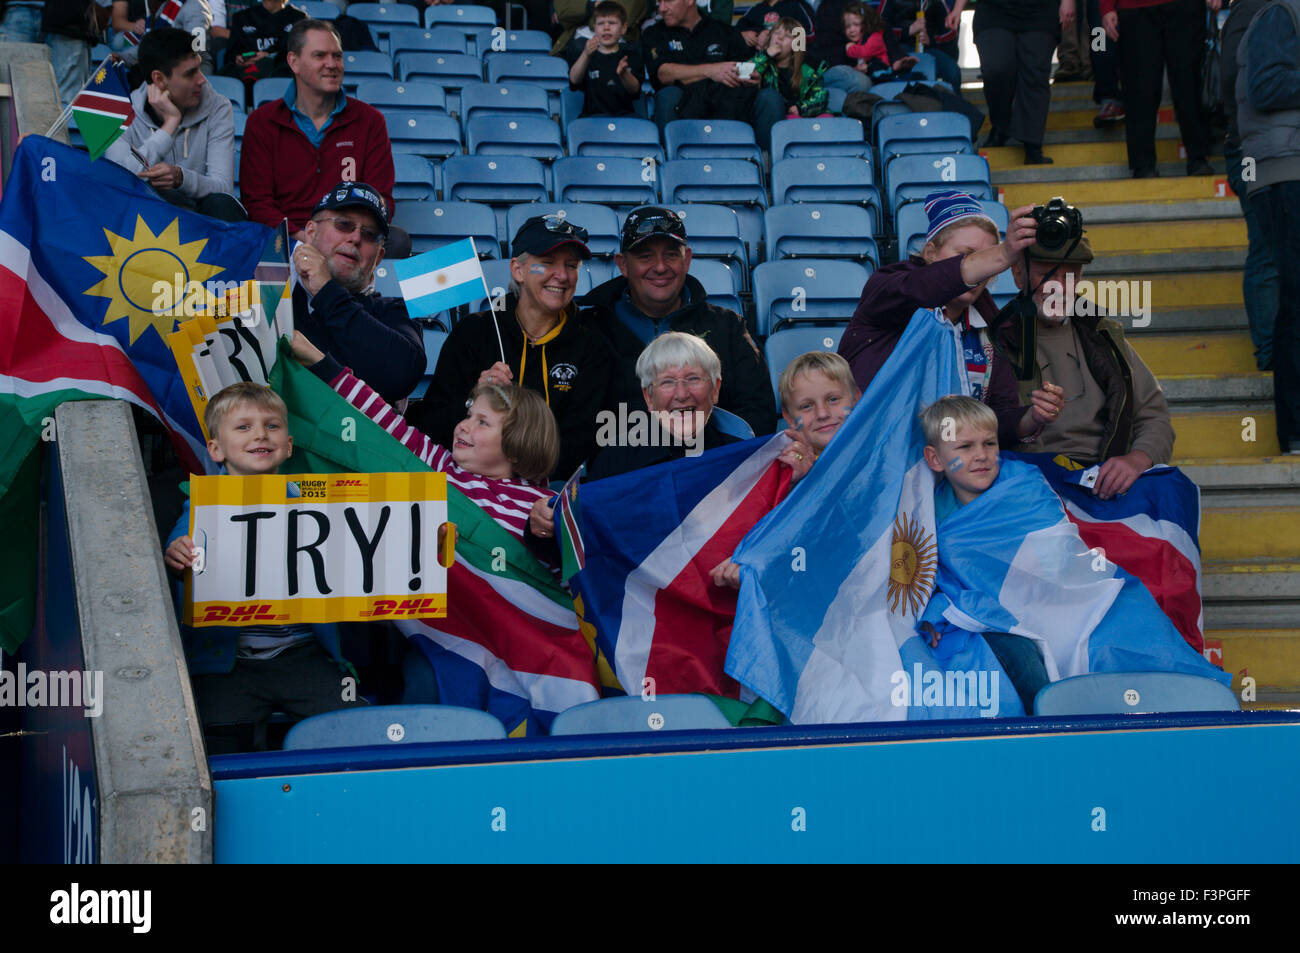 Leicester, UK, 11 October 2015, Argentina v Namibia, Rugby World Cup 2015, Pool C, Credit: Colin Edwards/Alamy Live News Stock Photo